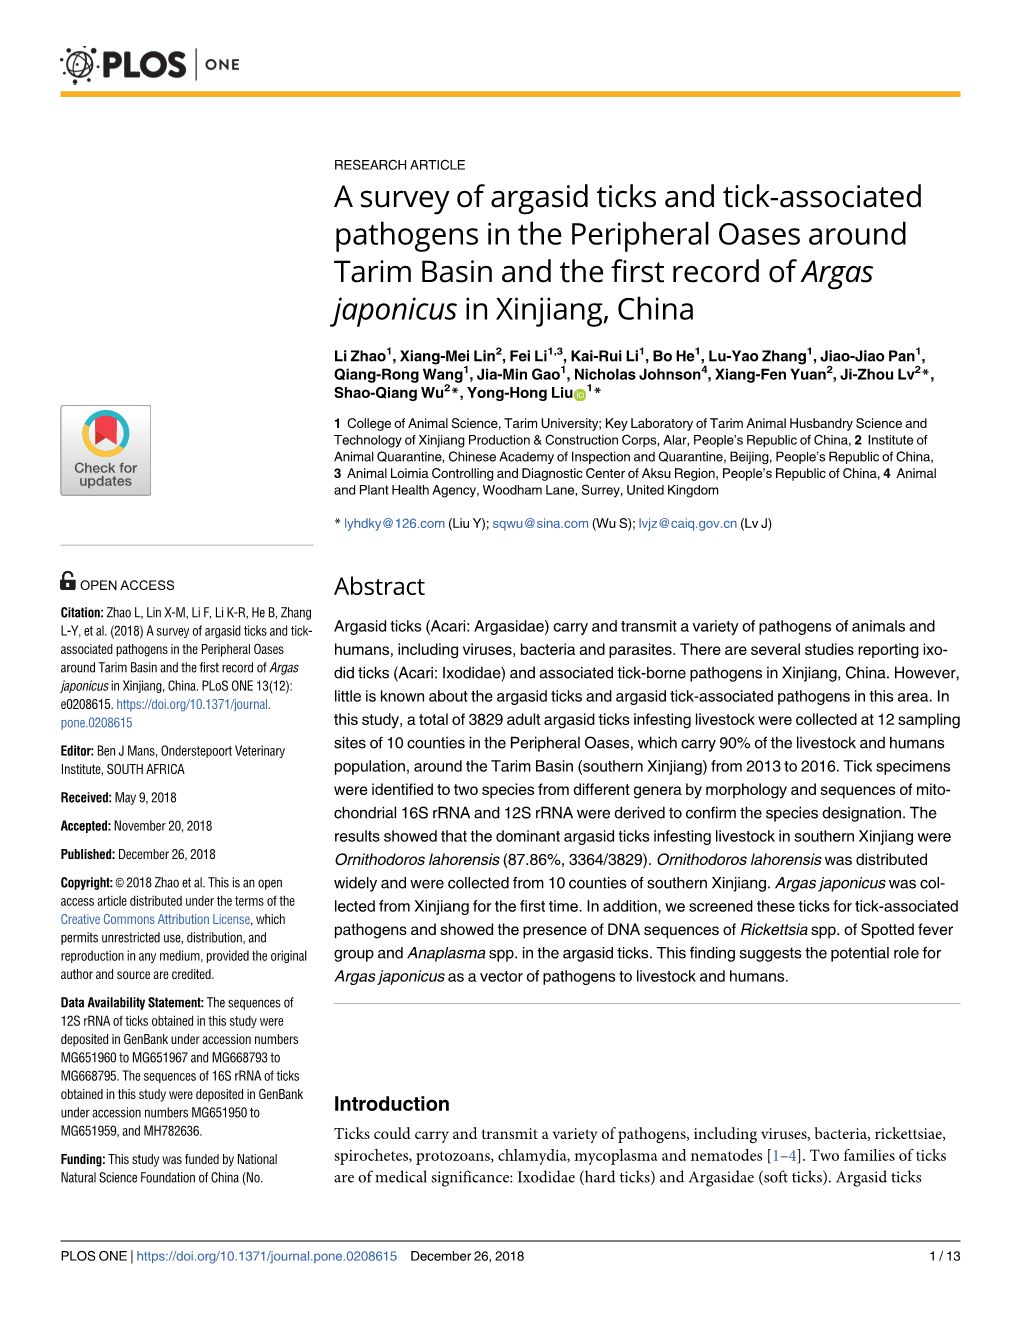 A Survey of Argasid Ticks and Tick-Associated Pathogens in the Peripheral Oases Around Tarim Basin and the First Record of Argas Japonicus in Xinjiang, China